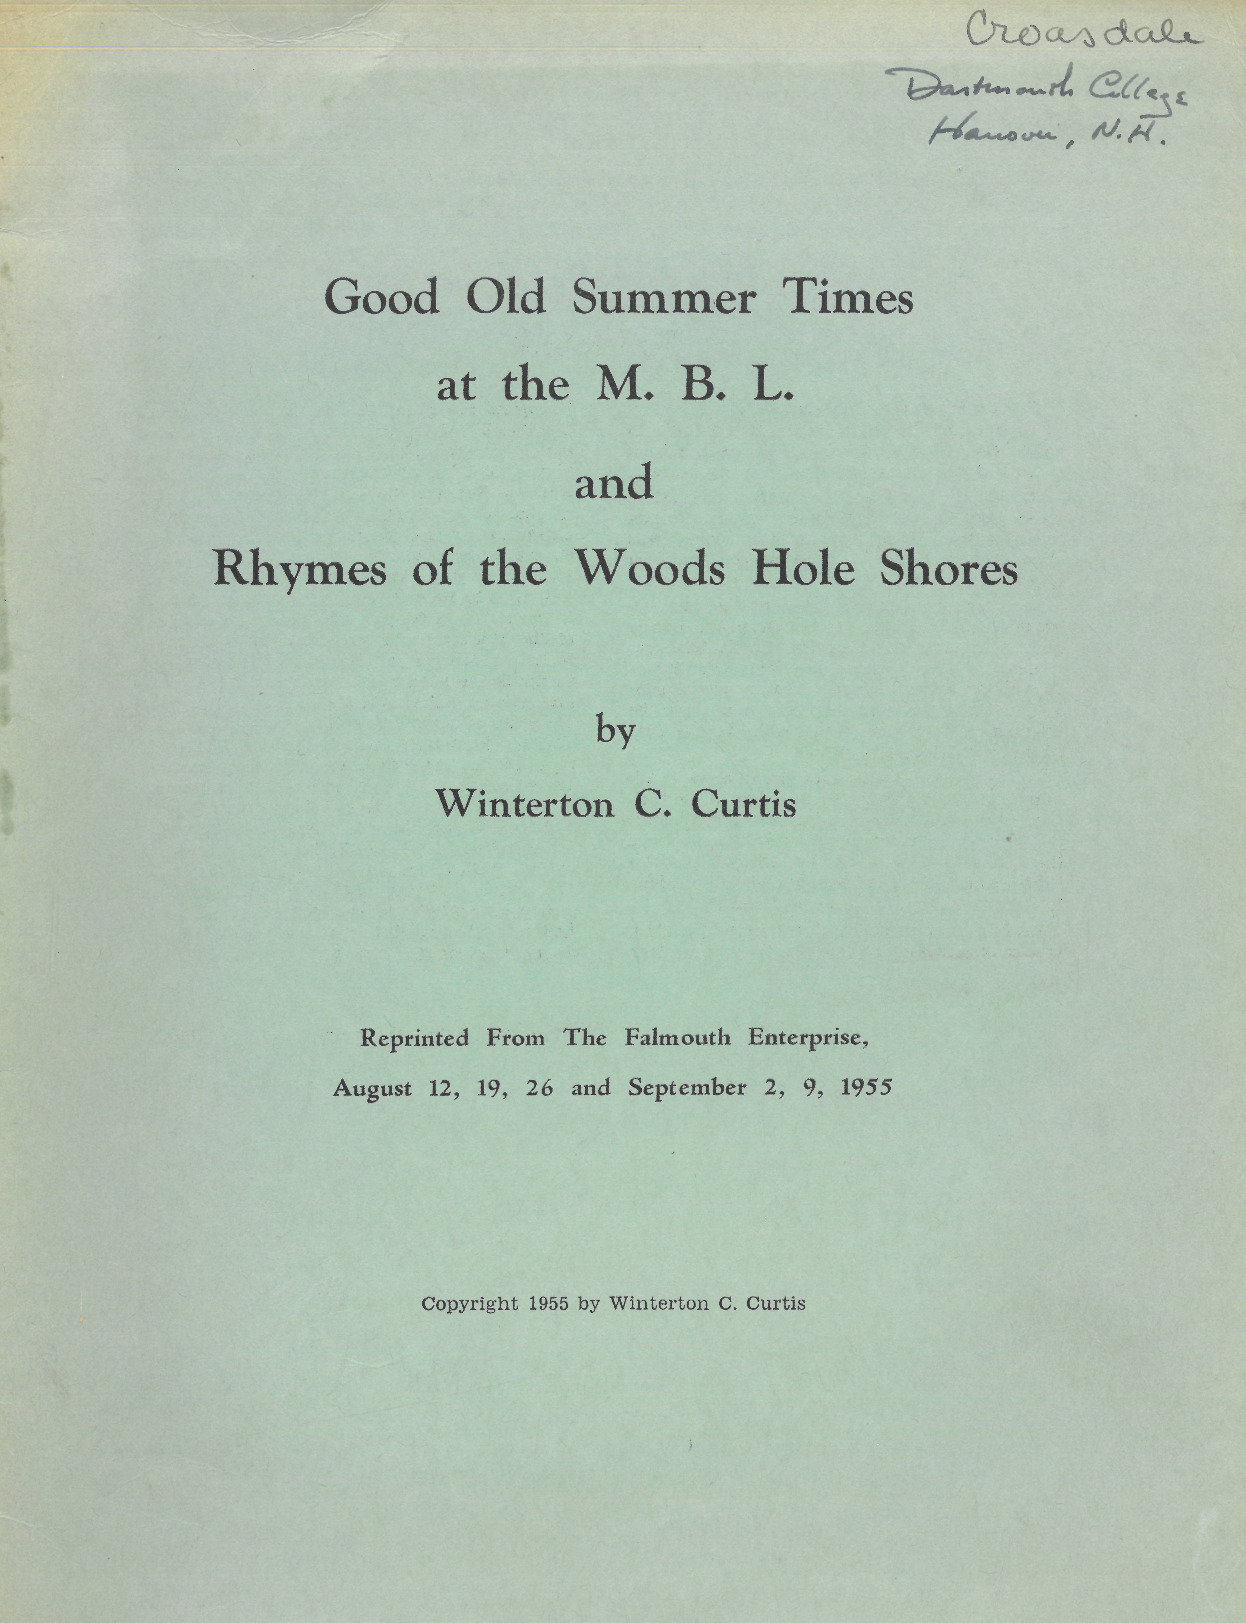 Good Old Summer Times at the M.B.L. and Rhymes of the Woods Hole Shores